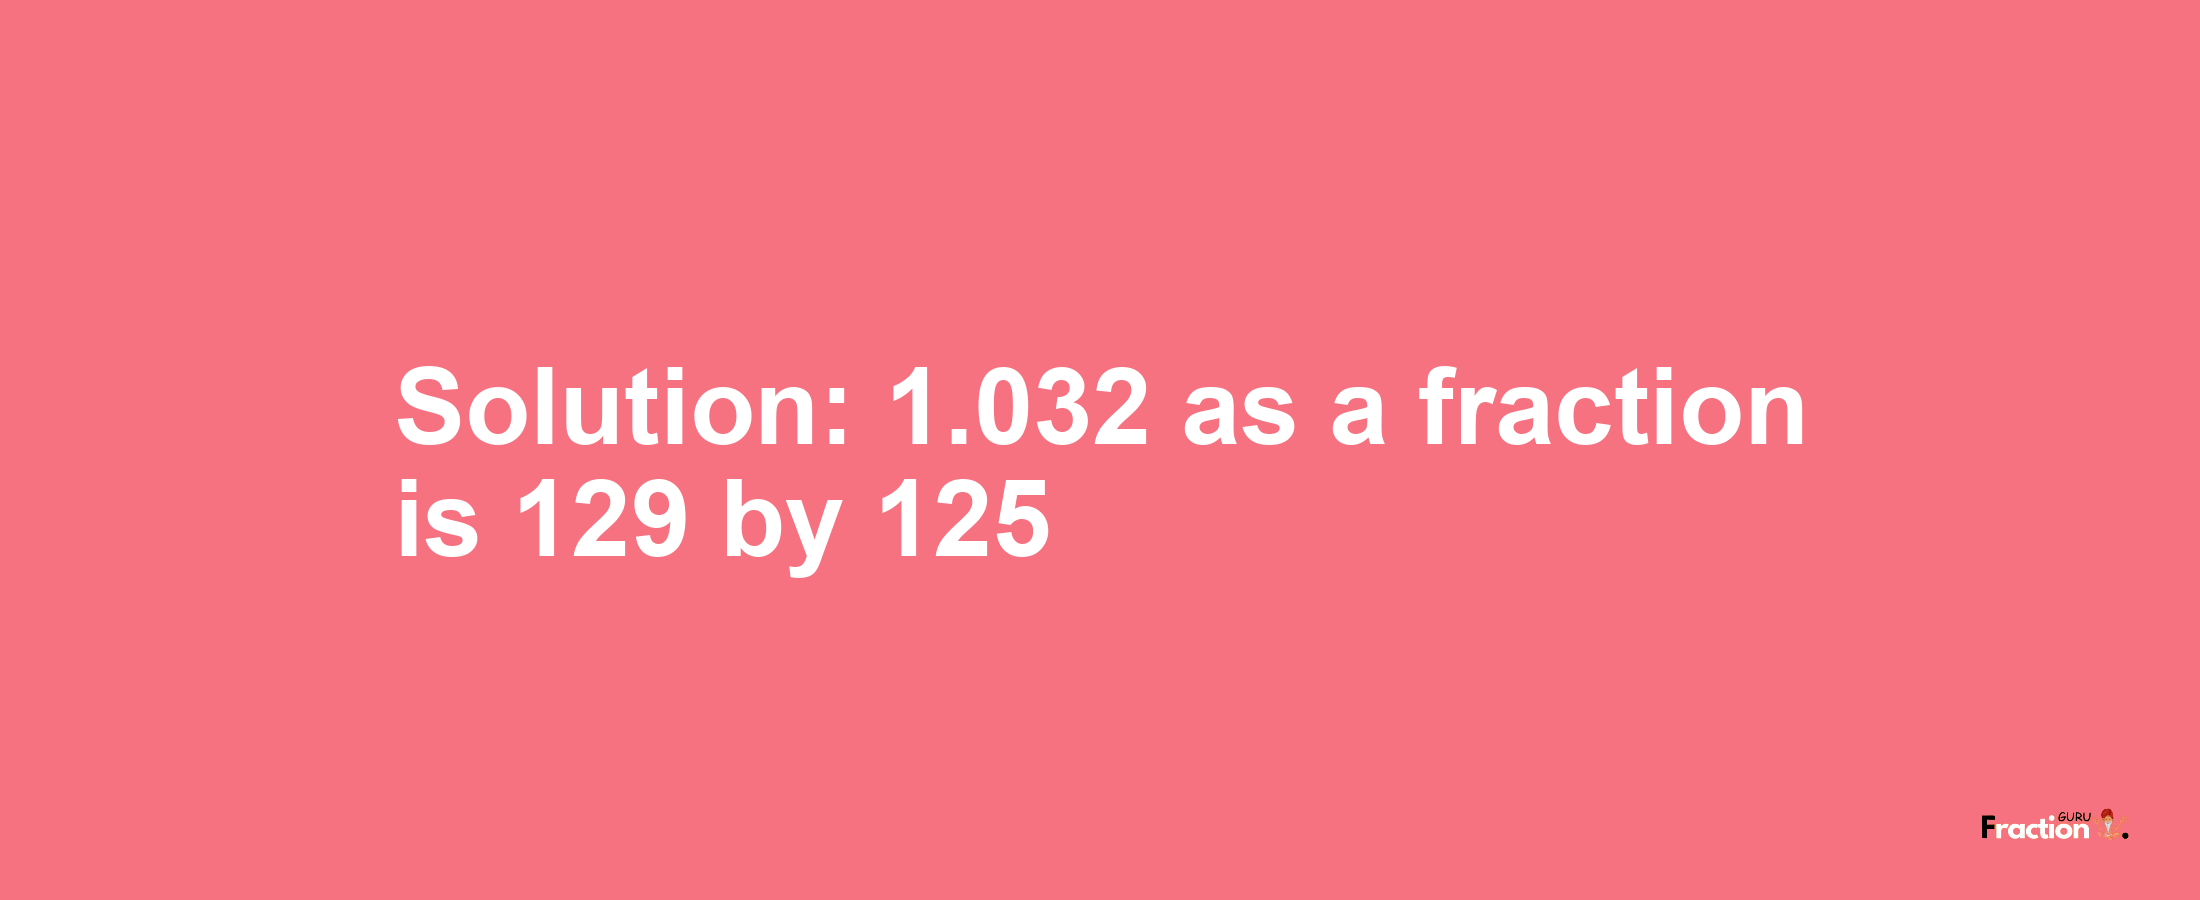 Solution:1.032 as a fraction is 129/125